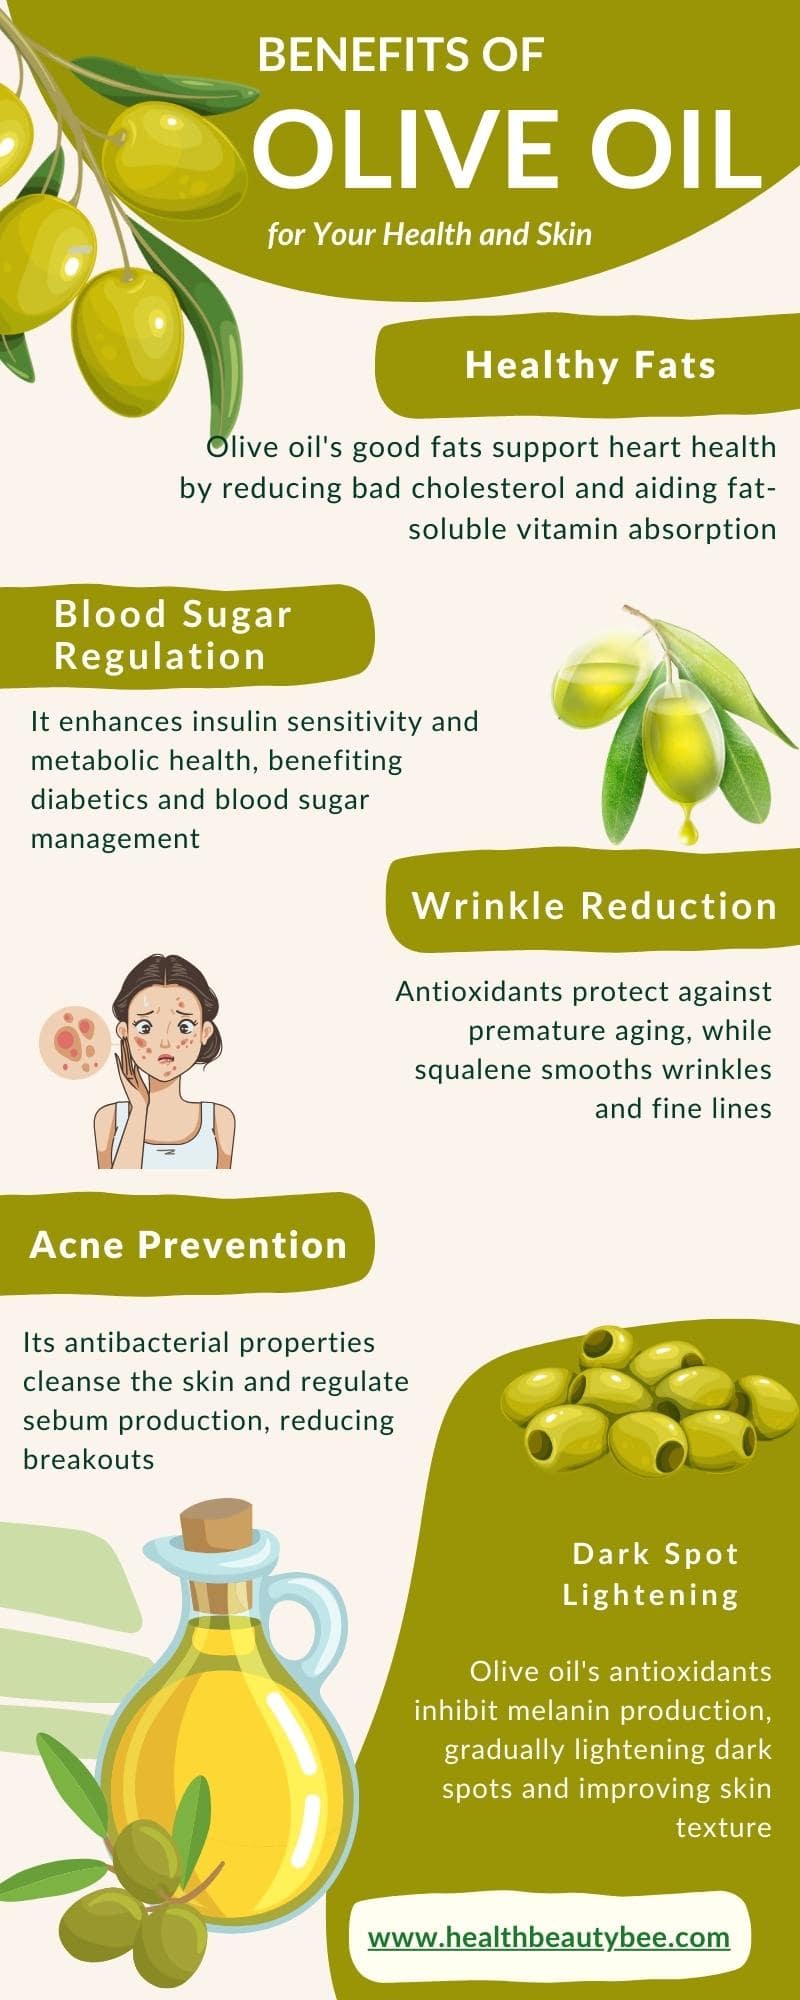 Benefits of Olive Oil for Your Health and Skin healthbeautybee infographic healthbeautybee